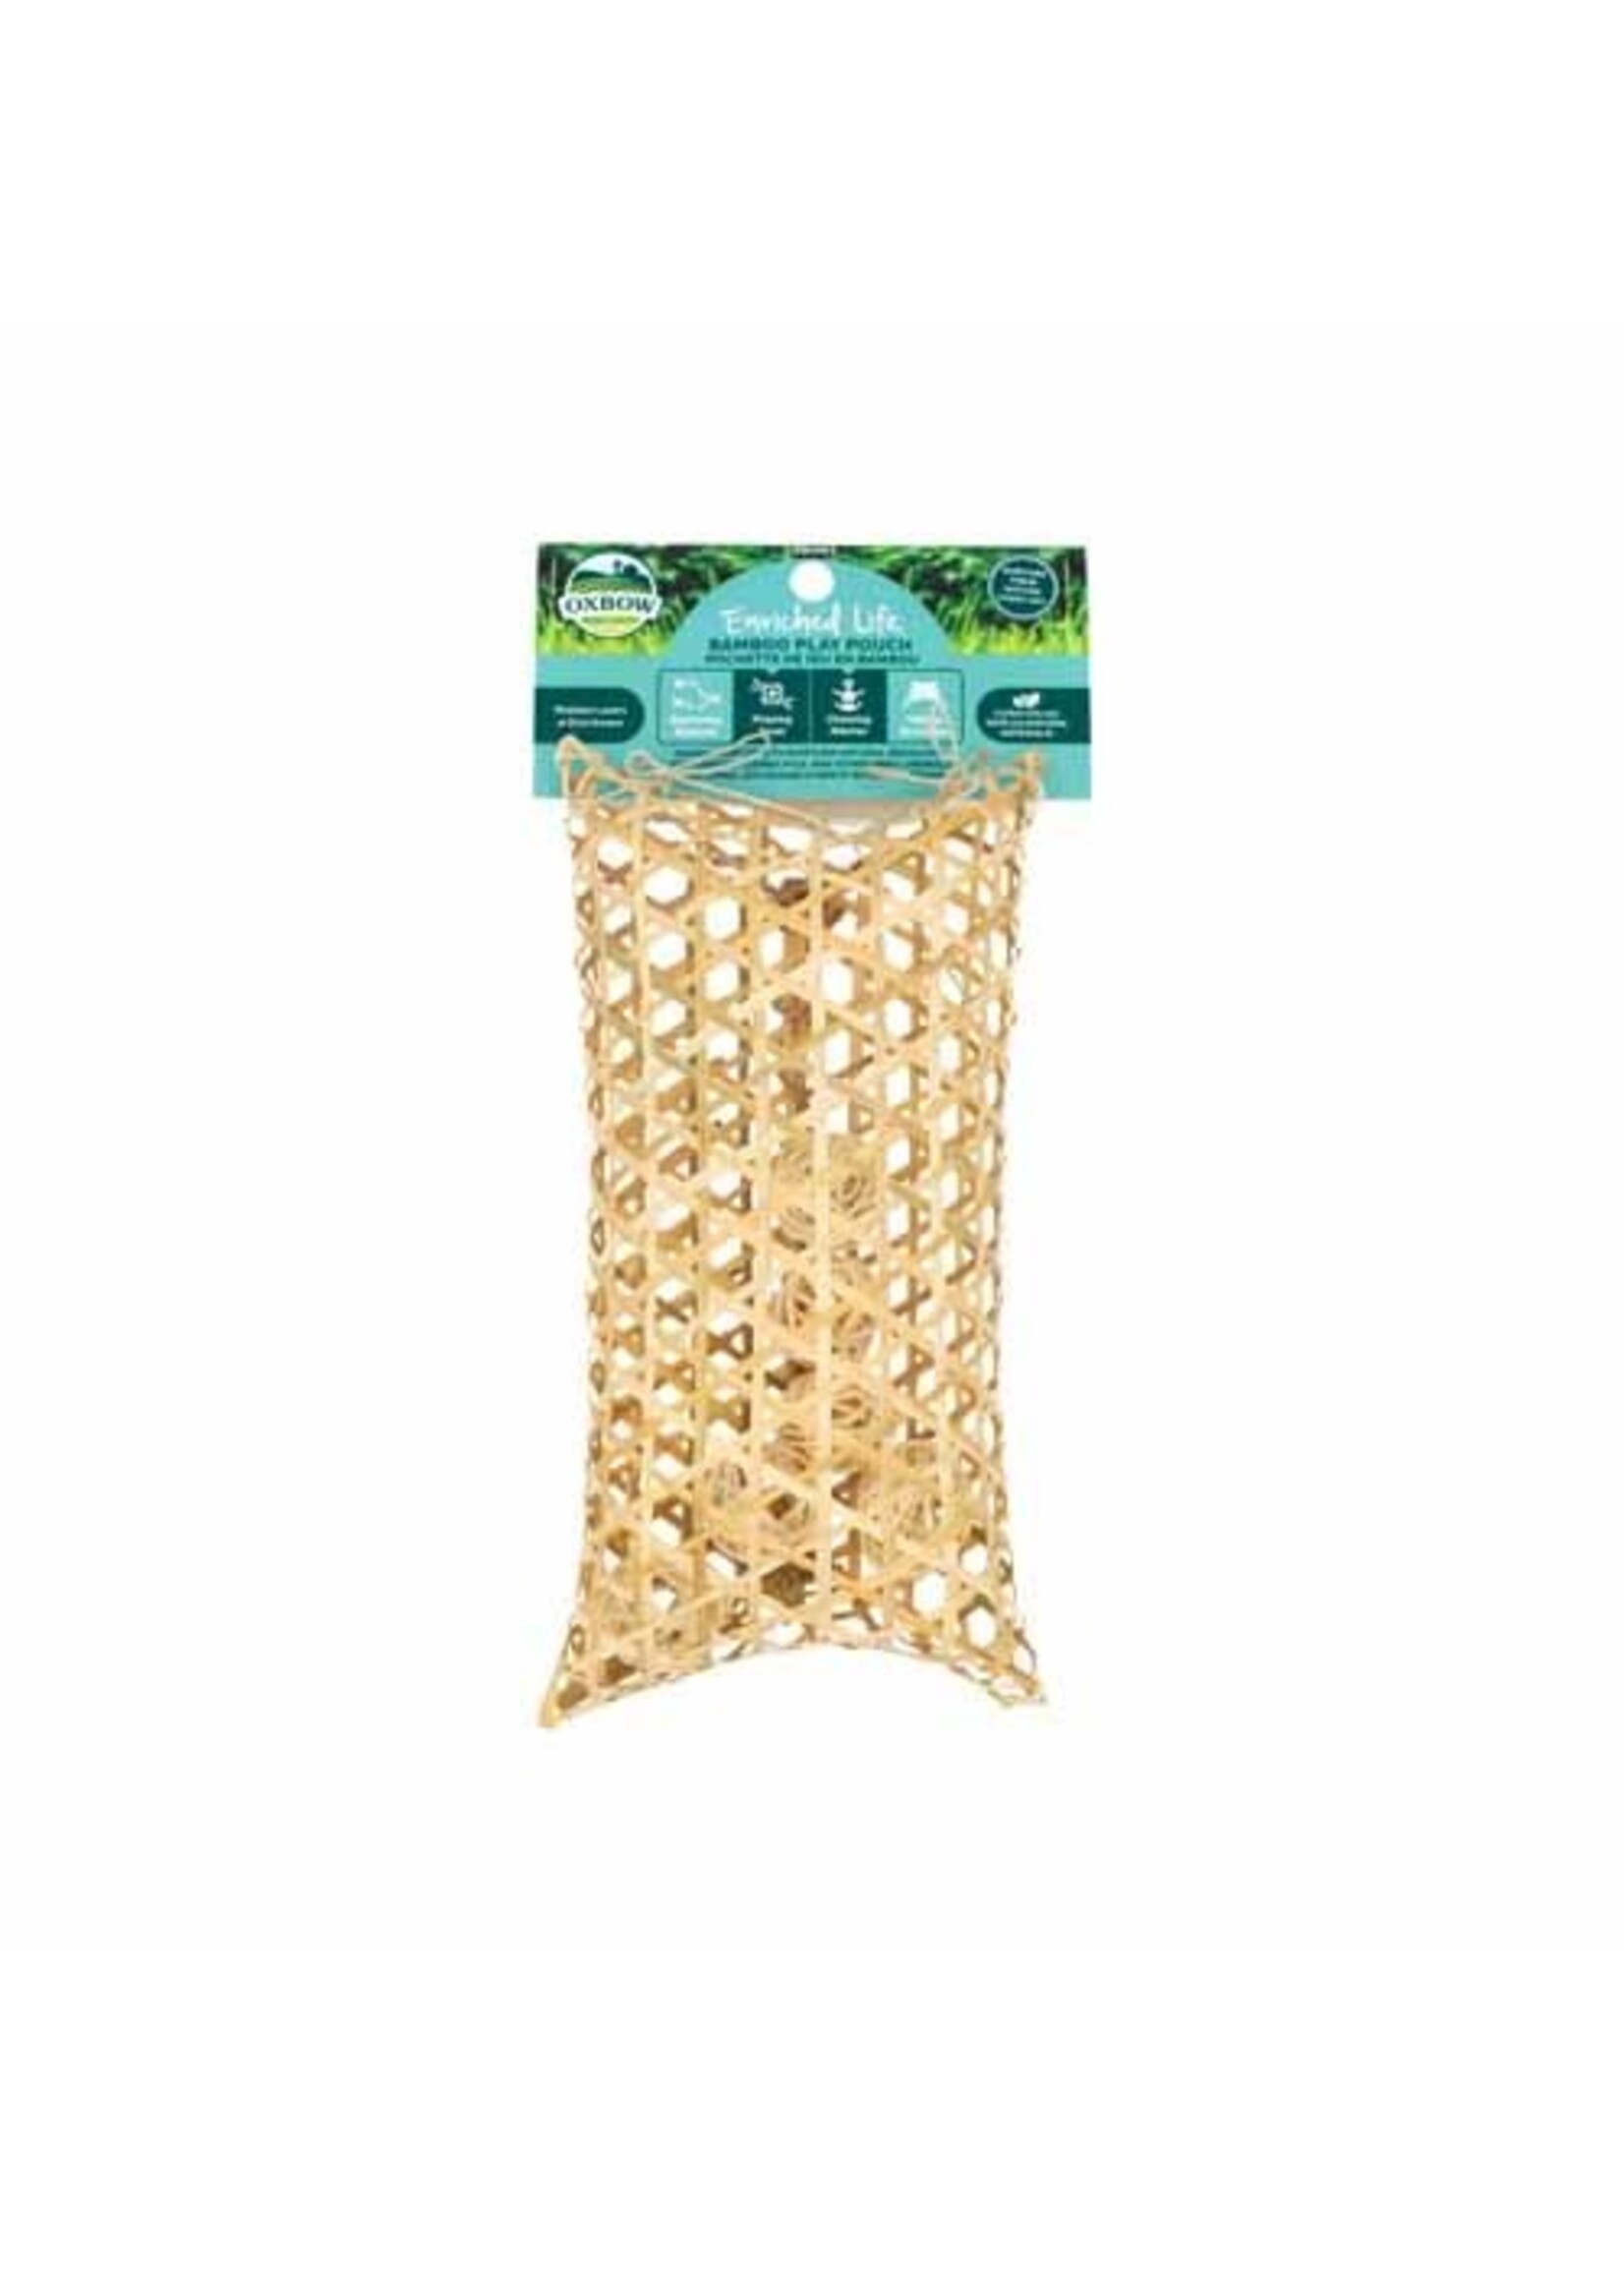 Oxbow Oxbow Enriched Life Bamboo Play Pouch